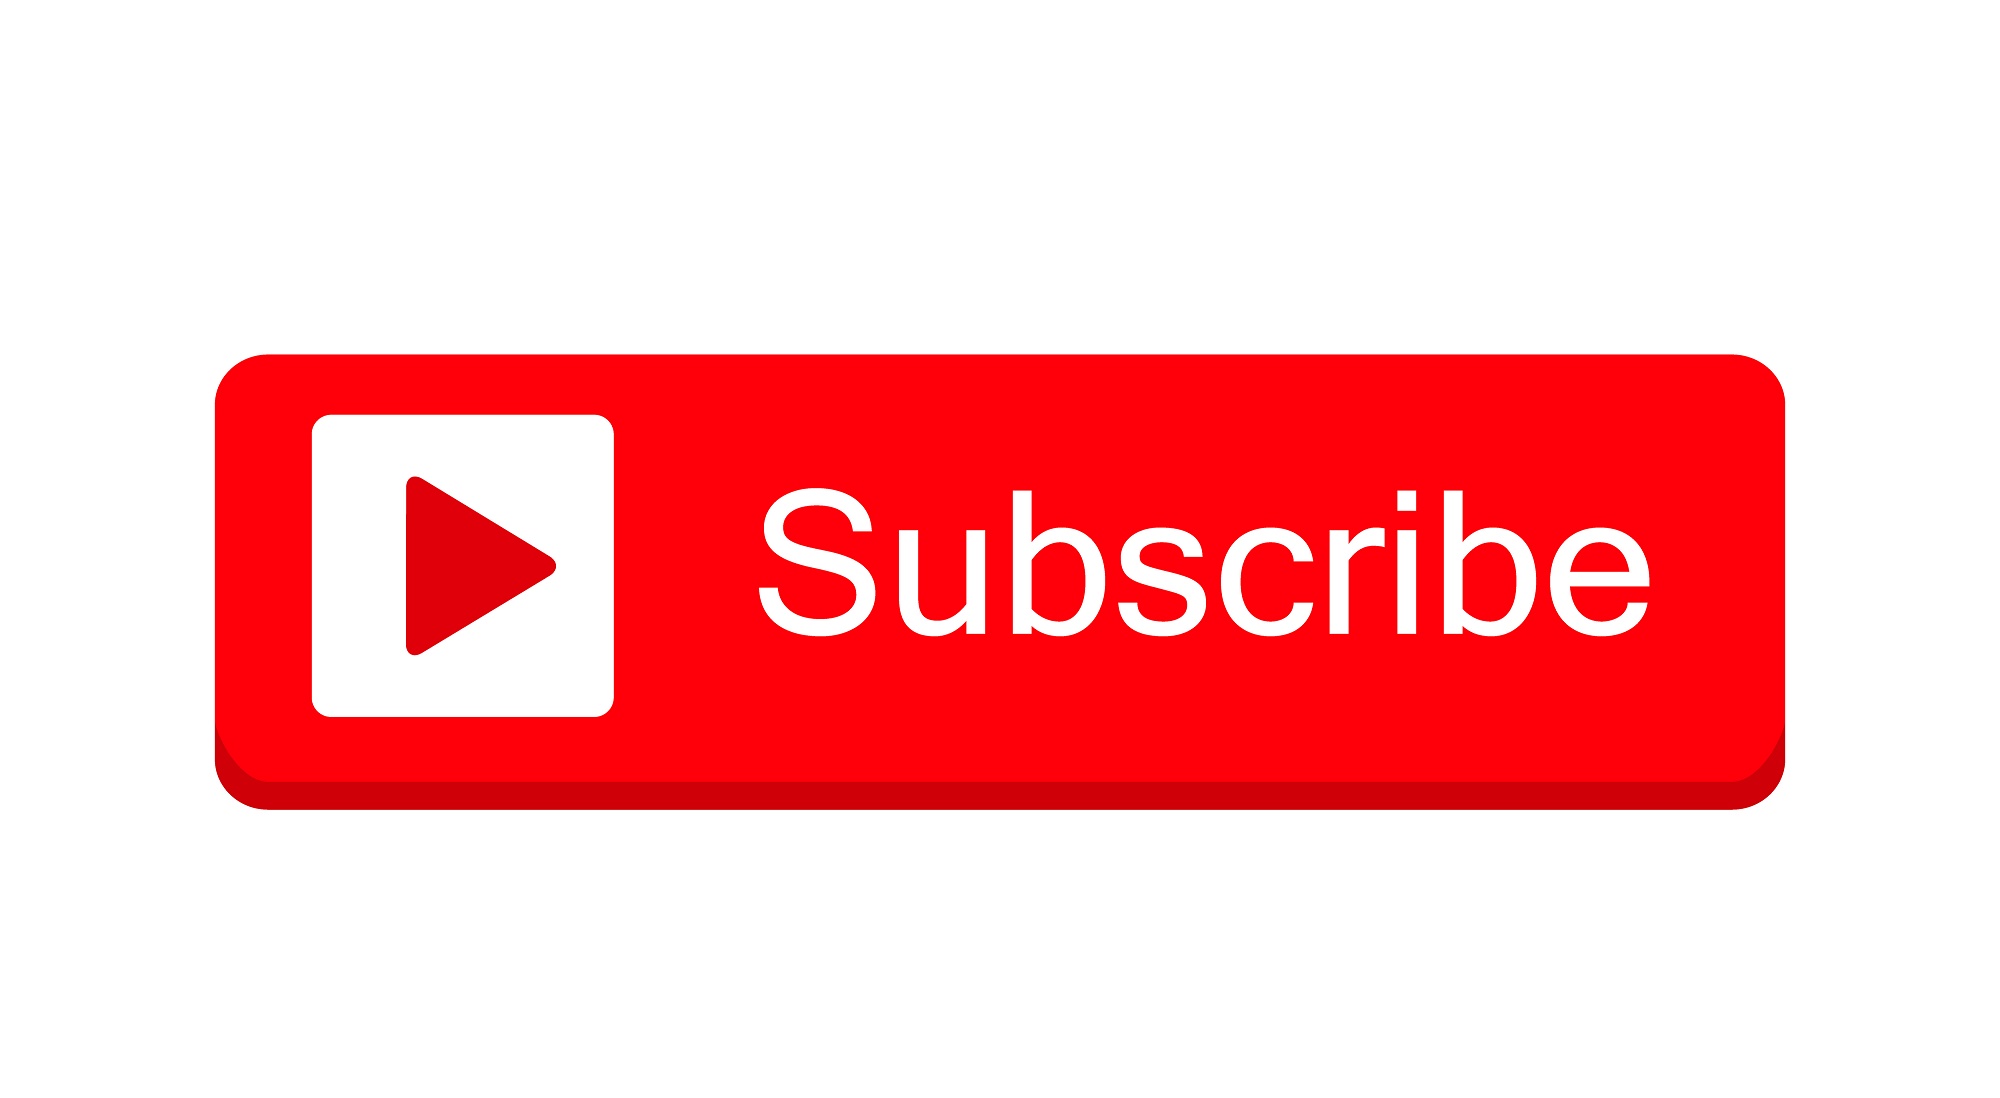 How To Get Paid On YouTube With Under 2,000 Subscribers